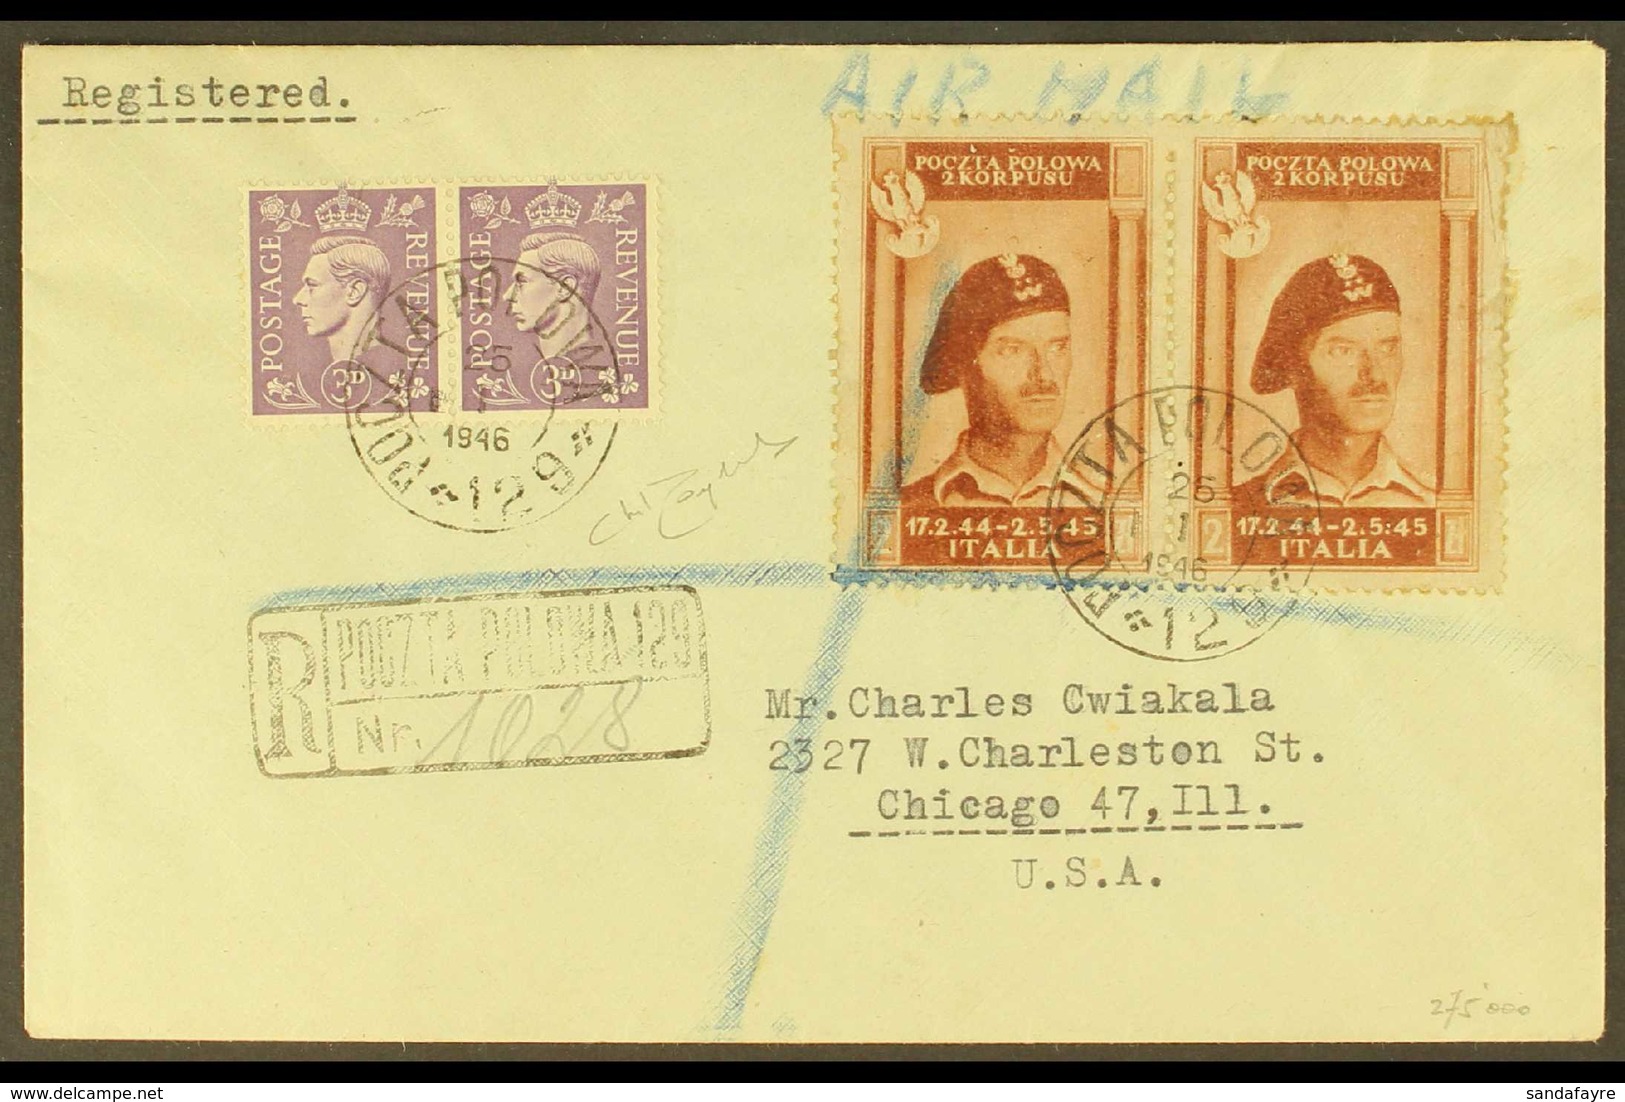 POLISH CORPS 1946 Registered Cover To Chicago Franked GB 3d Lilac Plus Polish Corps 2z Red Brown Pair, Sass 4, With Pozt - Ohne Zuordnung